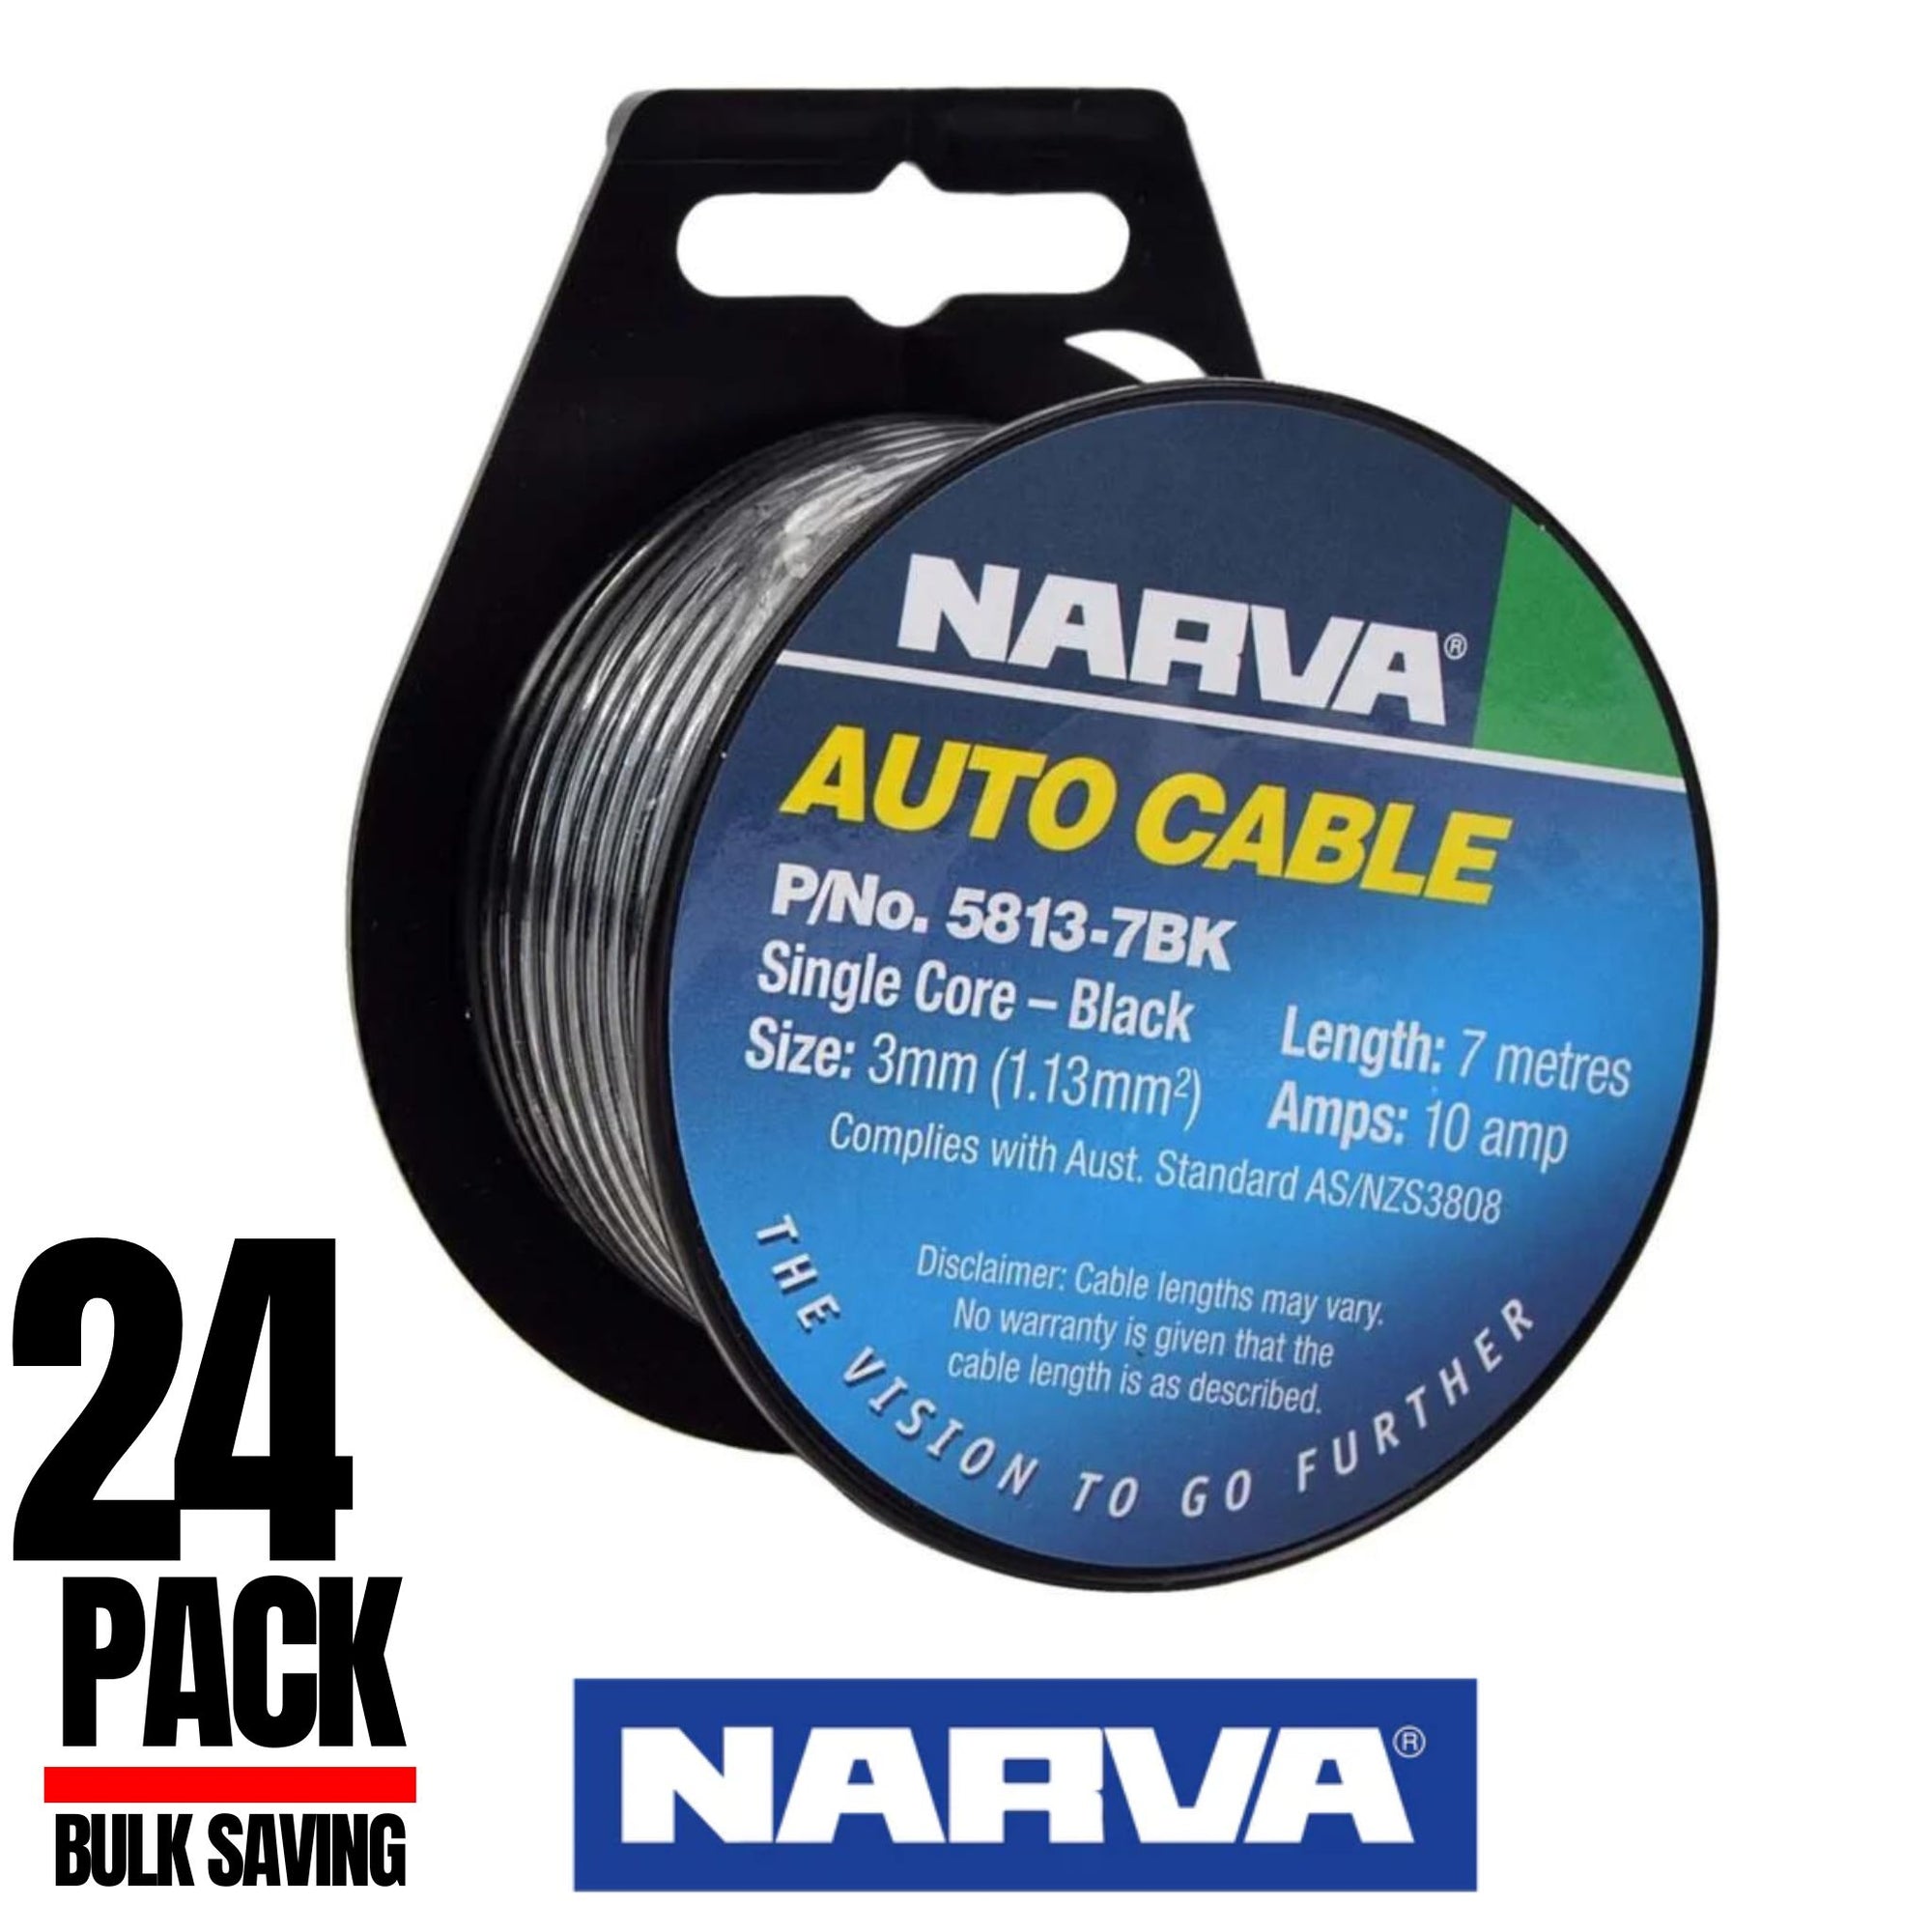 (24 PACK) Narva 10A 3mm Black Single Core Cable (7M) - 5813-7Bk - South East Clearance Centre